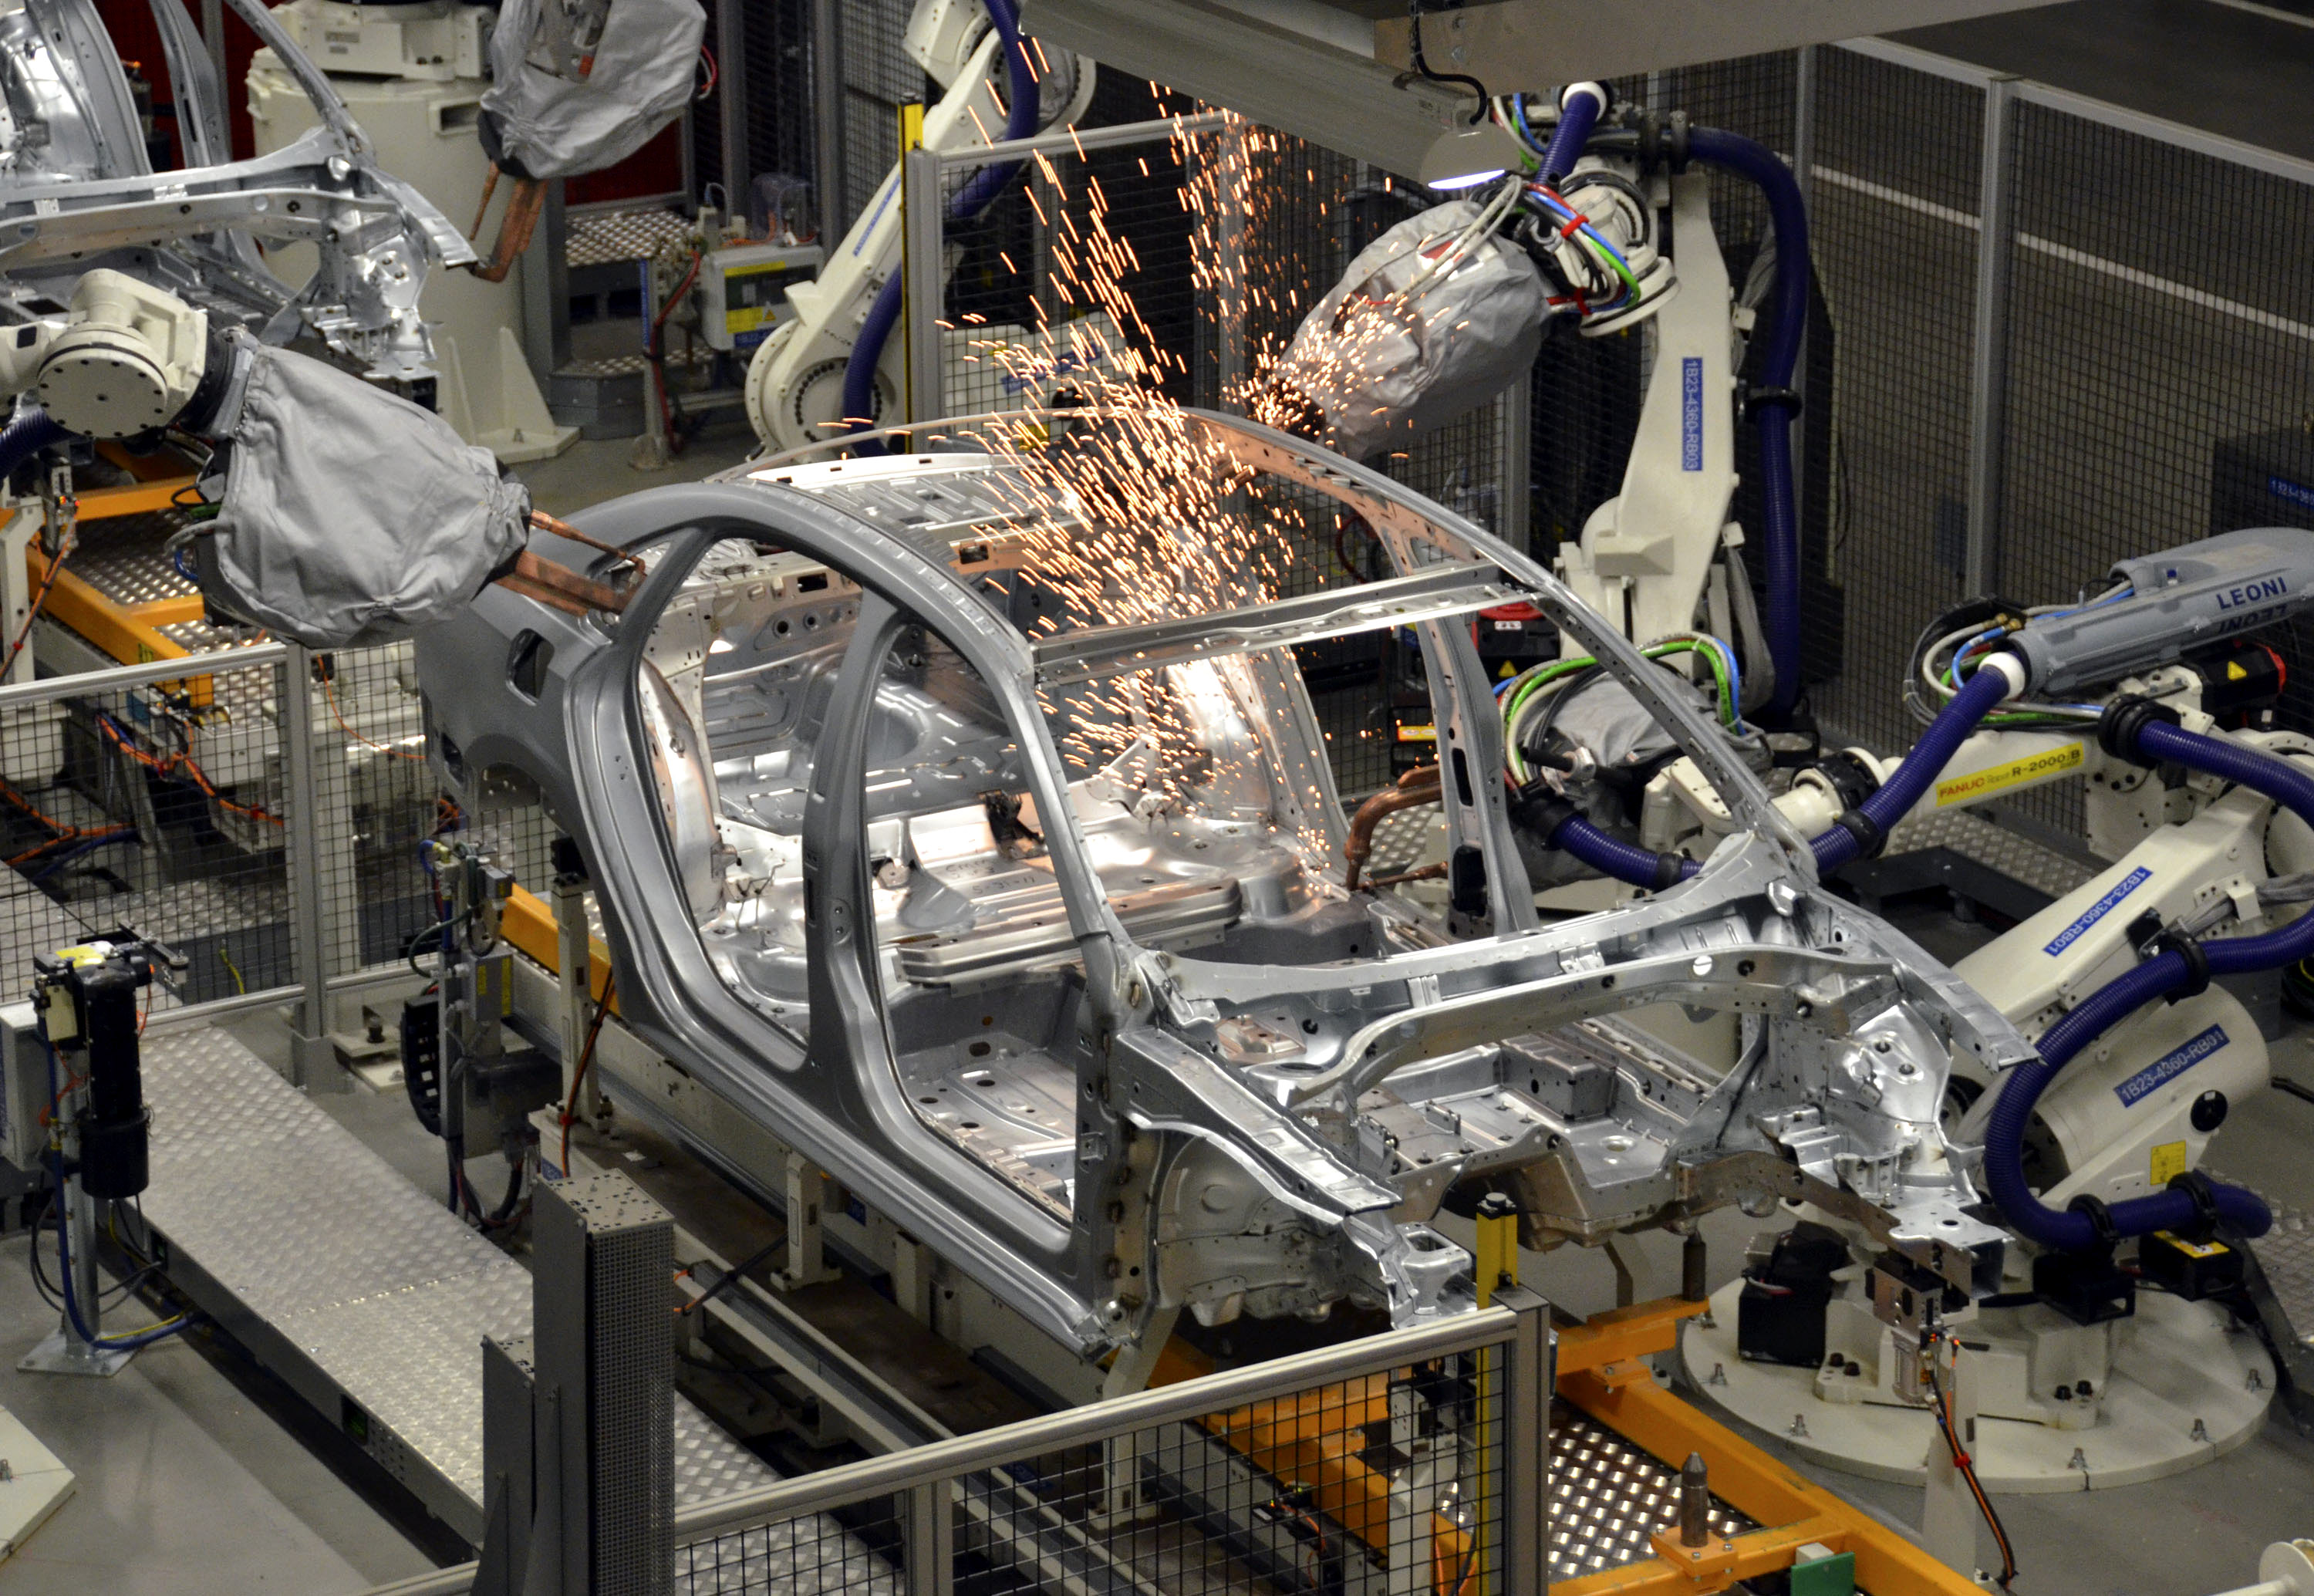 Robots at the Volkswagen Chattanooga plant weld a 2012 VW Passat in the body shop at the plant near Chattanooga, Tennessee, U.S., on Wednesday, June 1, 2011. The plant which has an initial capacity of 125,000 units per year, will build the 2012 Volkswagen Passat for the U.S., Mexico and Canada. Photographer: Mark Elias/Bloomberg (Mark Elias—Bloomberg/Getty Images)